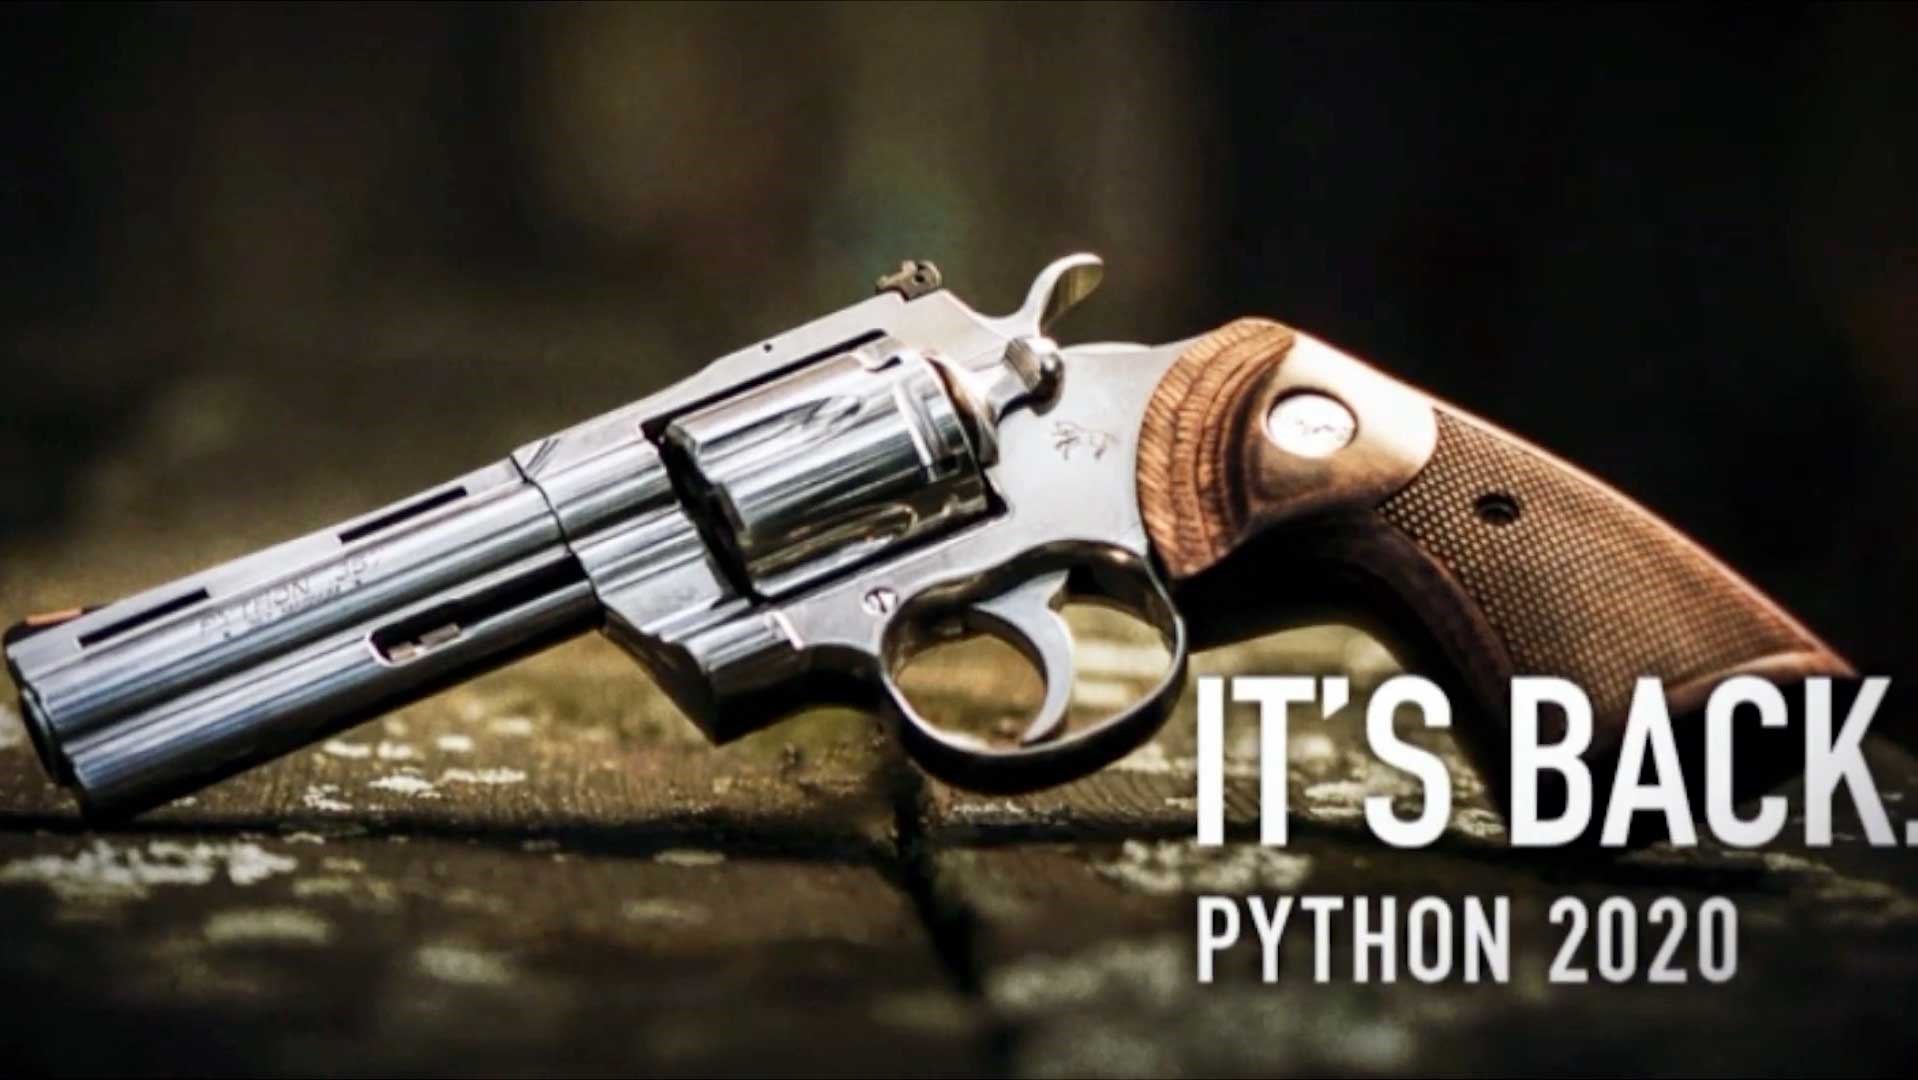 A new Colt Python introduced in 2020 shown on a wooden background with the text "It's back. Python 2020."